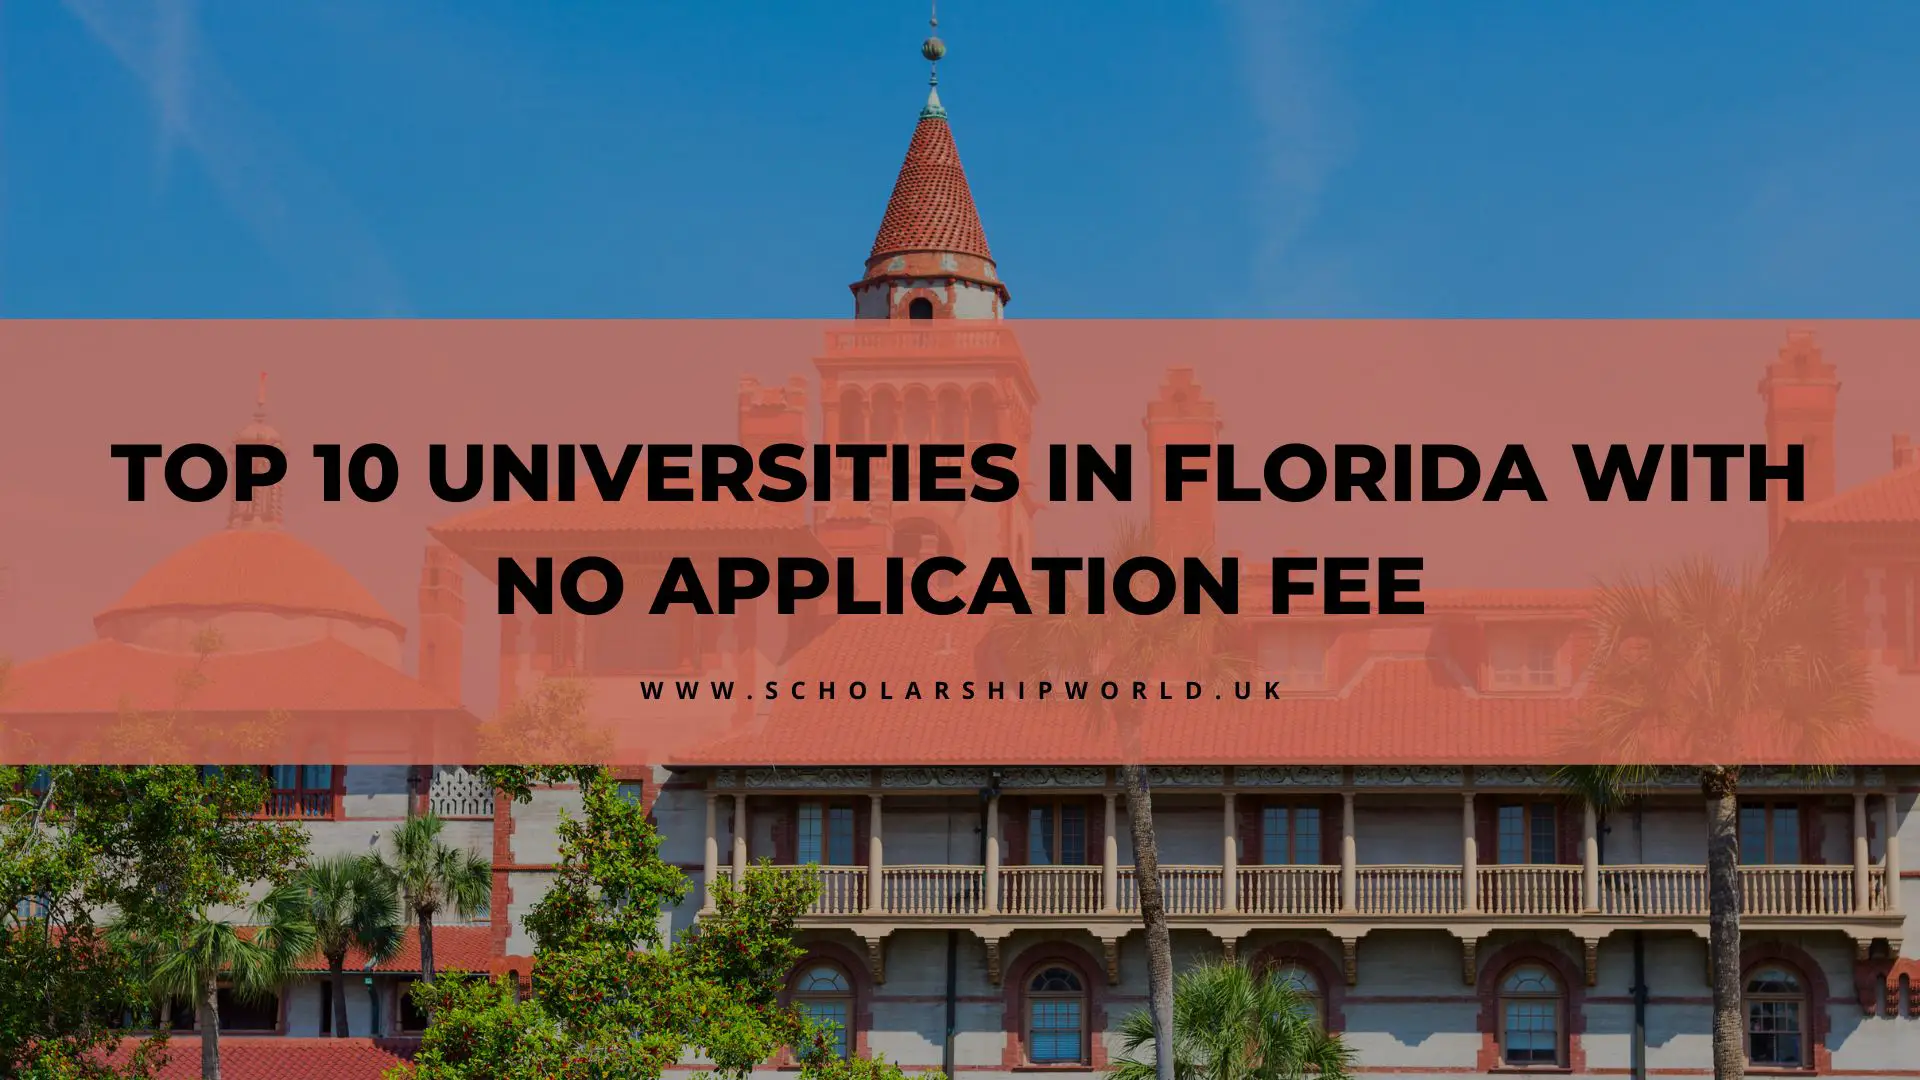 Top 10 Universities in Florida with No Application Fee